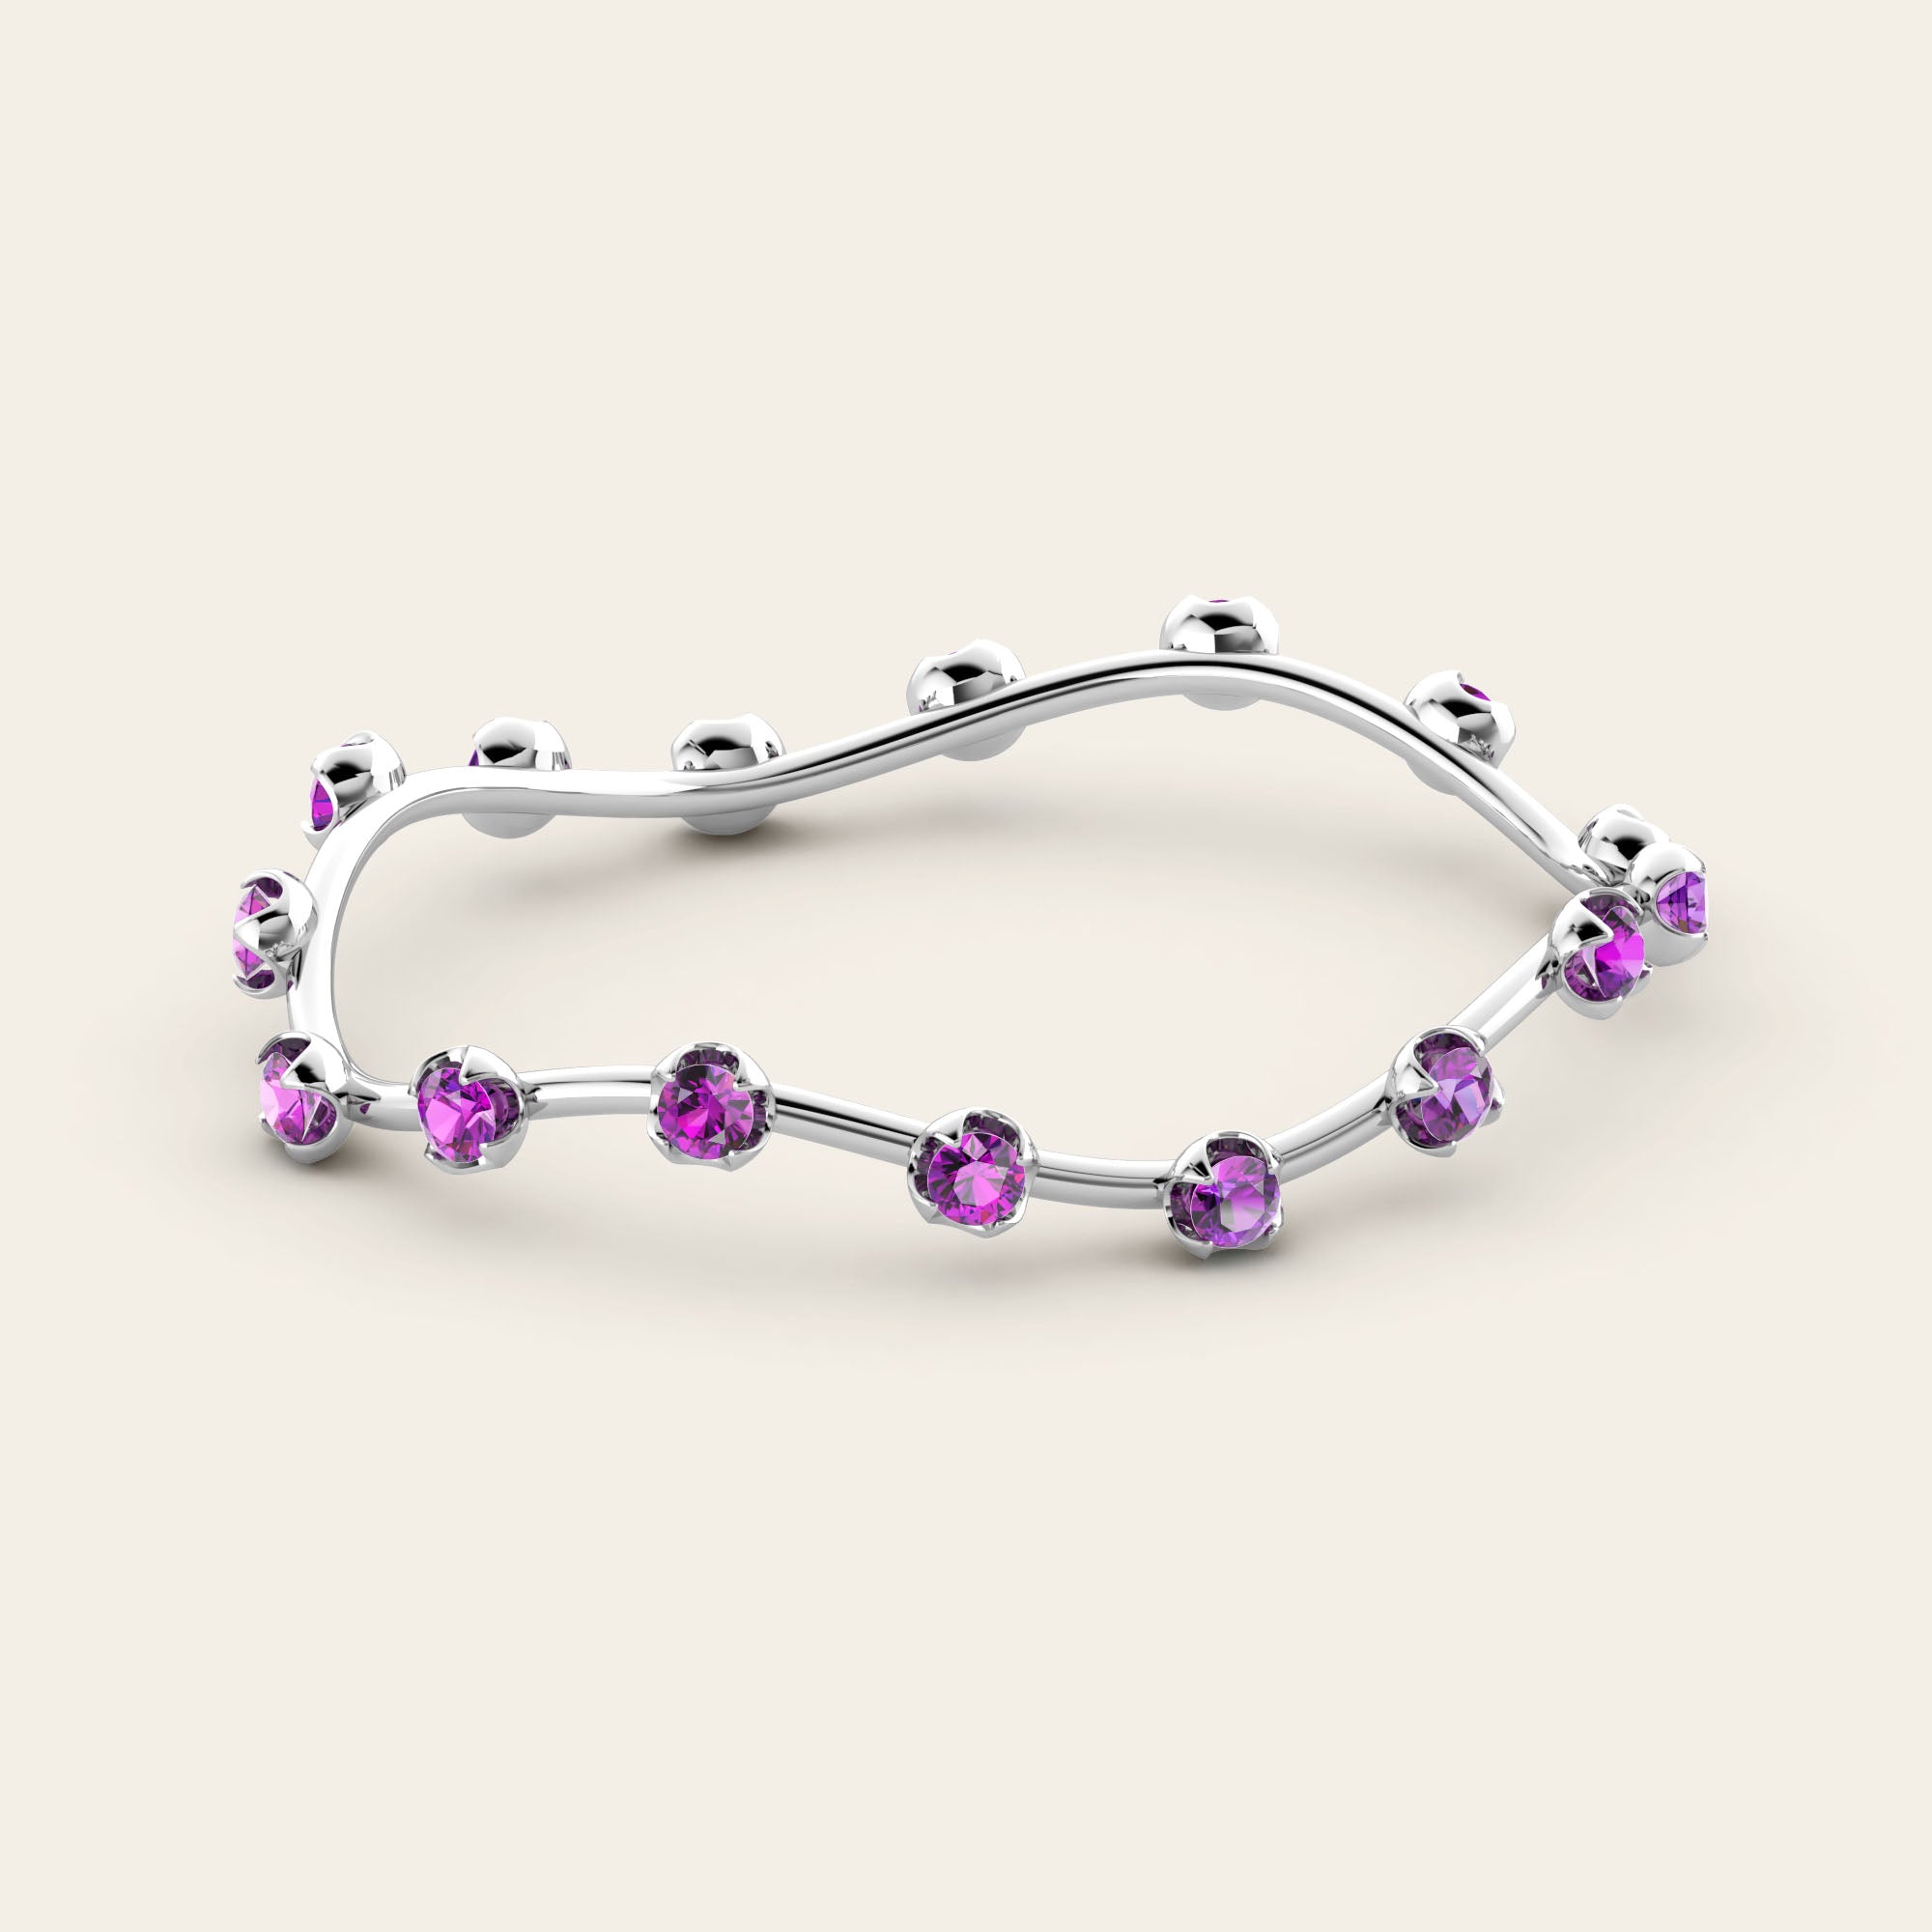 The Curve Bangle with Purple Garnets in 18k White Gold